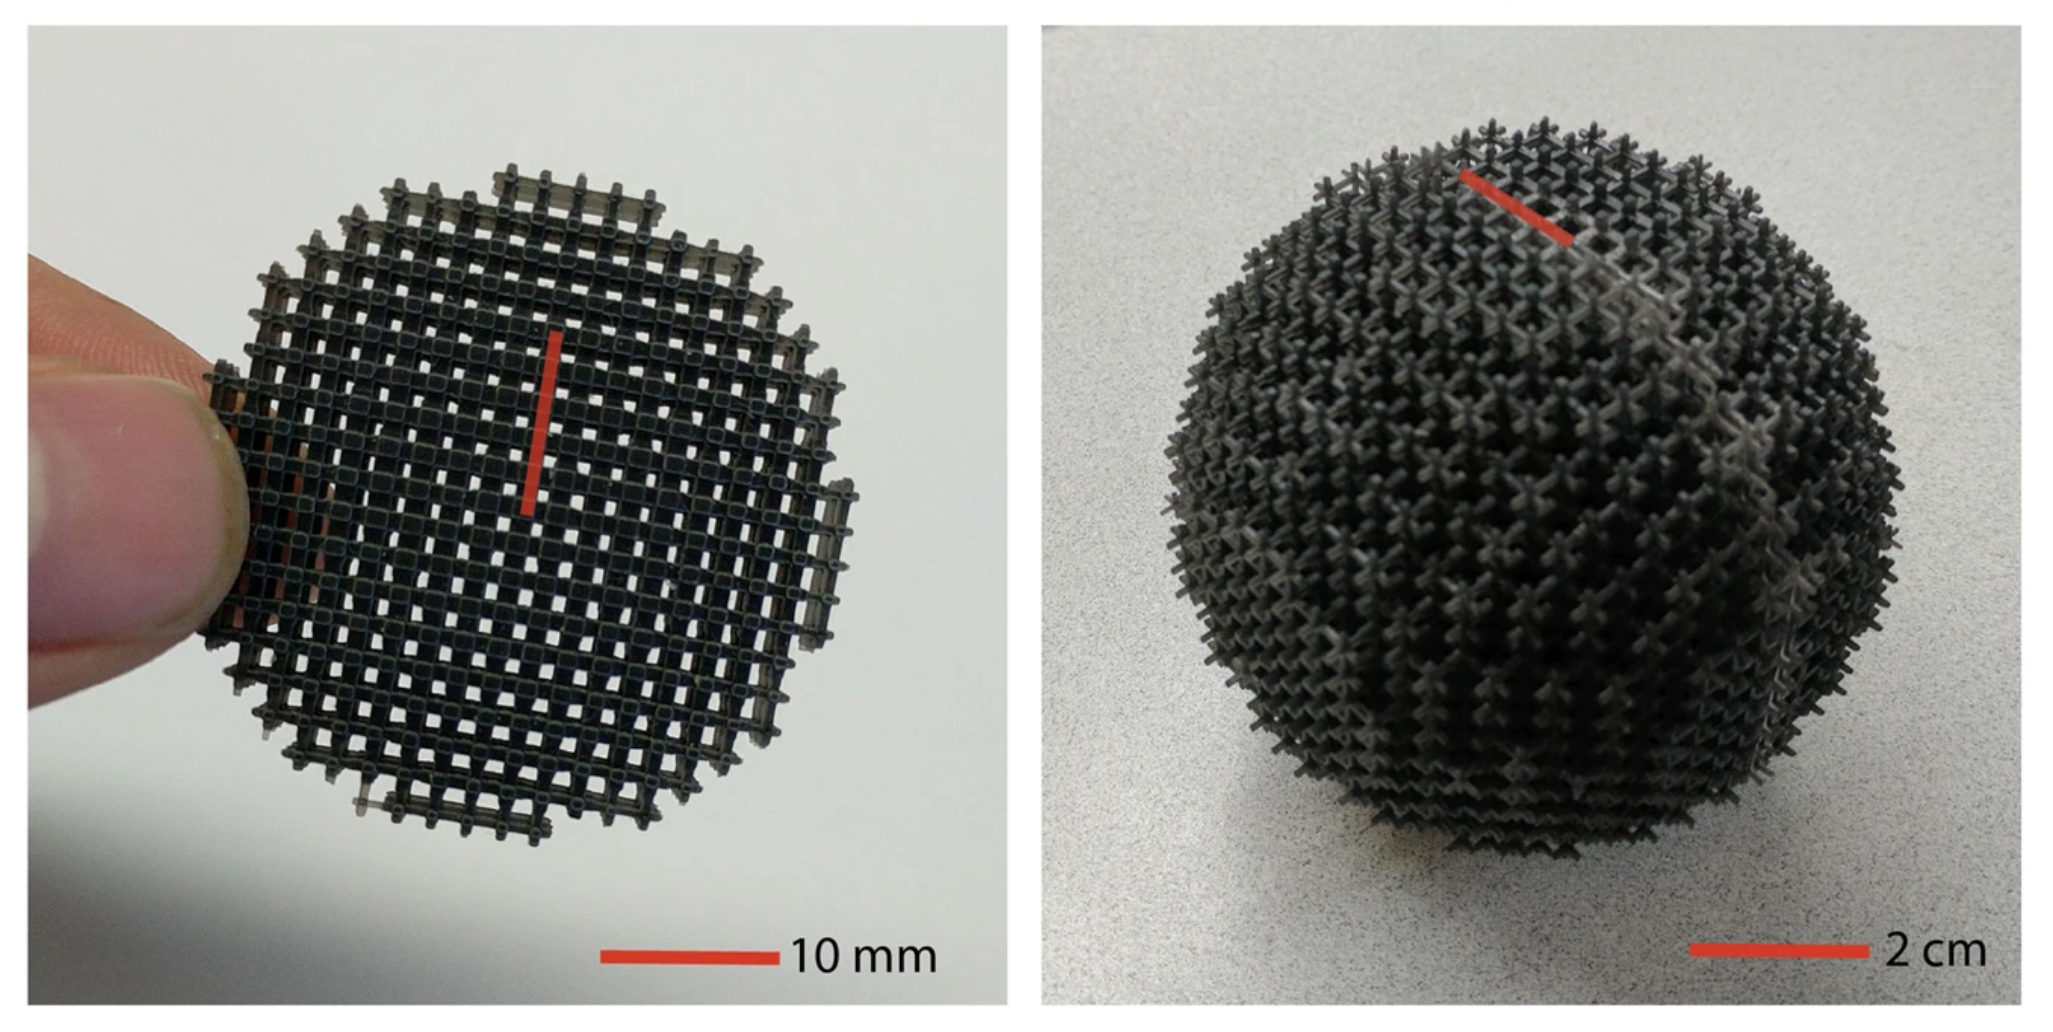 Acoustic imaging with metamaterial Luneburg lenses